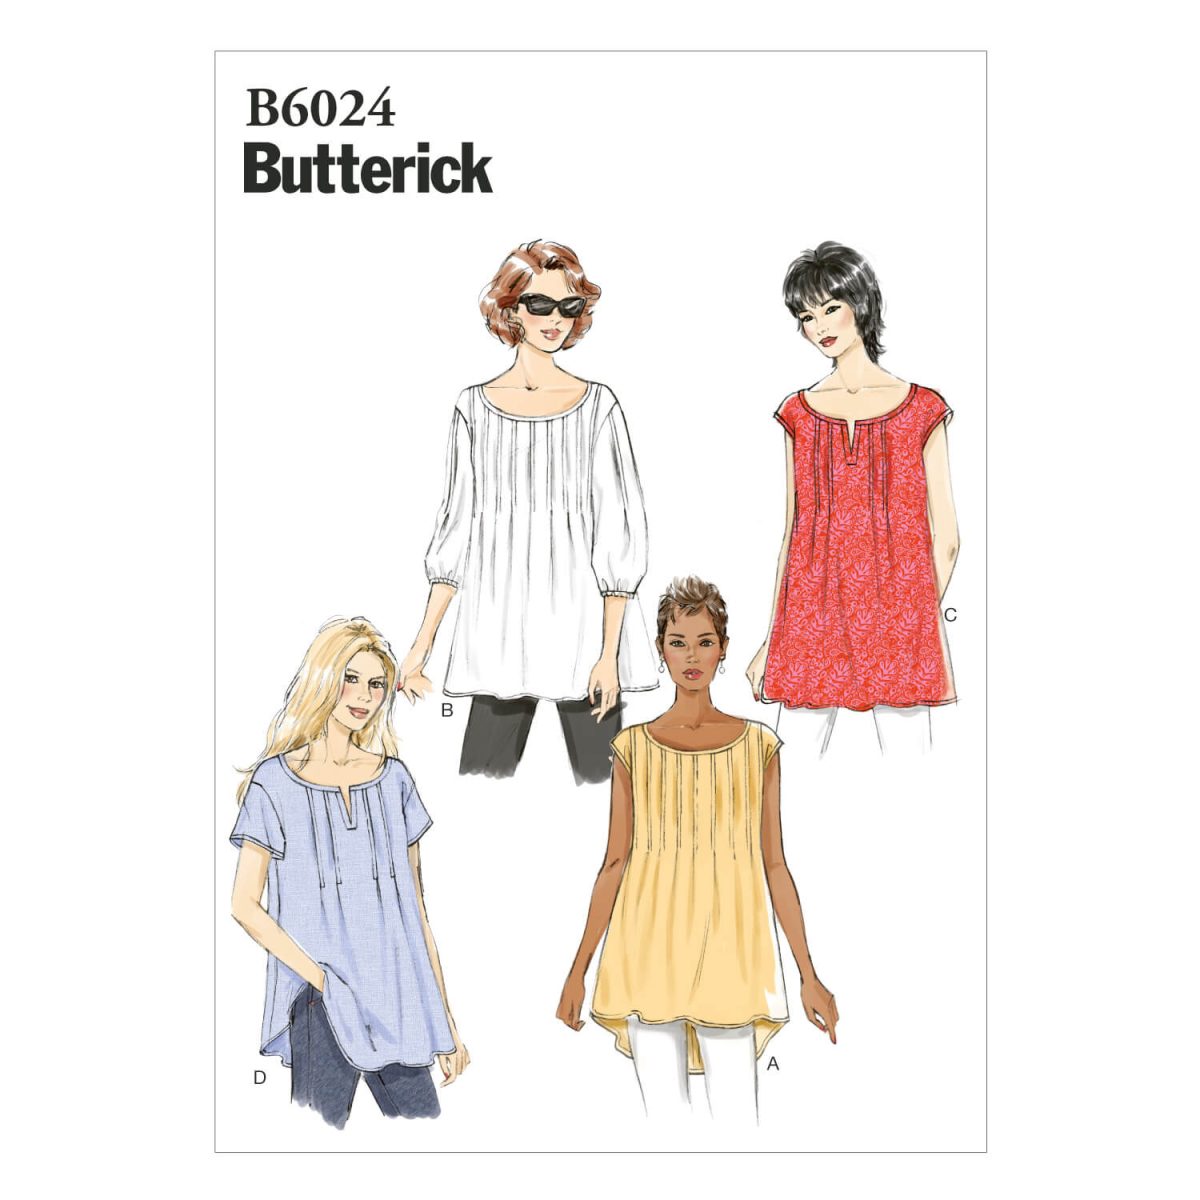 Butterick Sewing Pattern B6024 Misses' Top